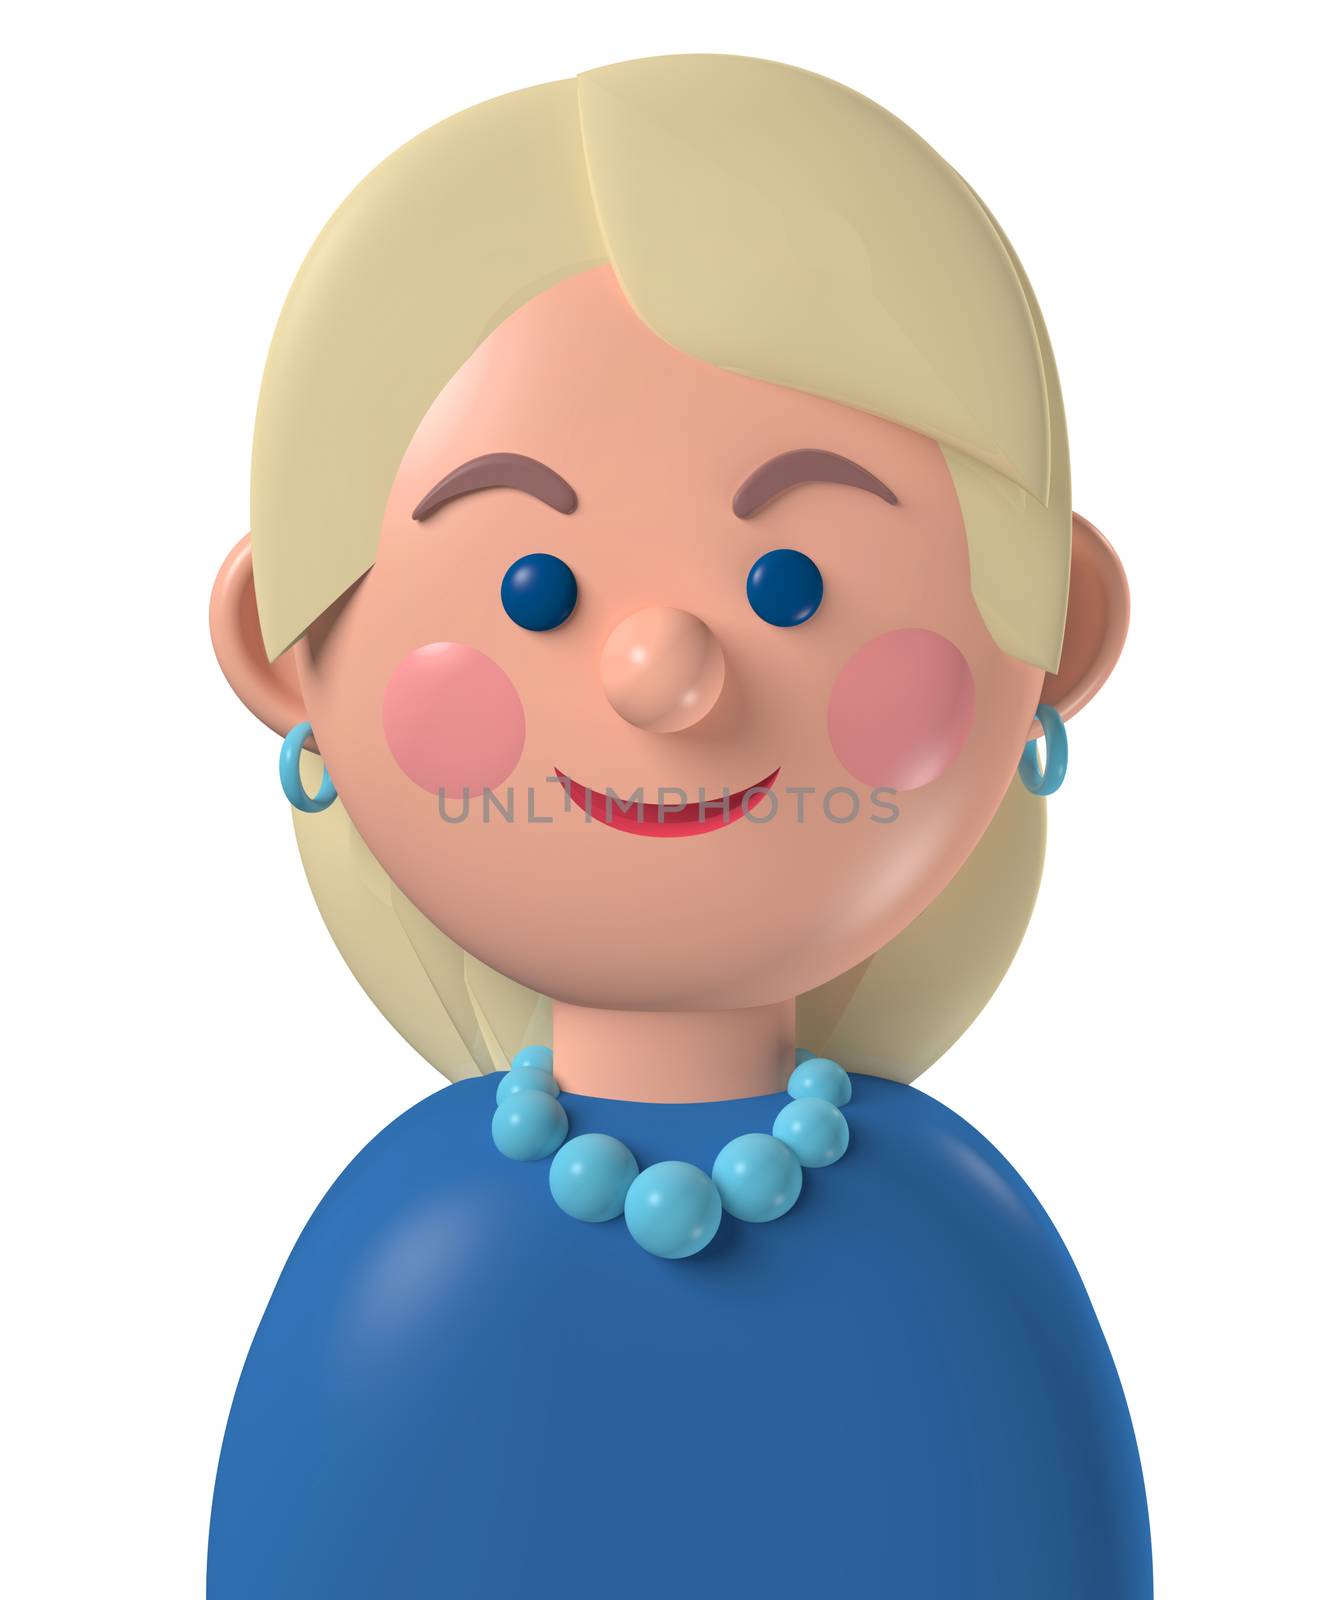 Cartoon character 3d happy white blonde haired young woman by anterovium